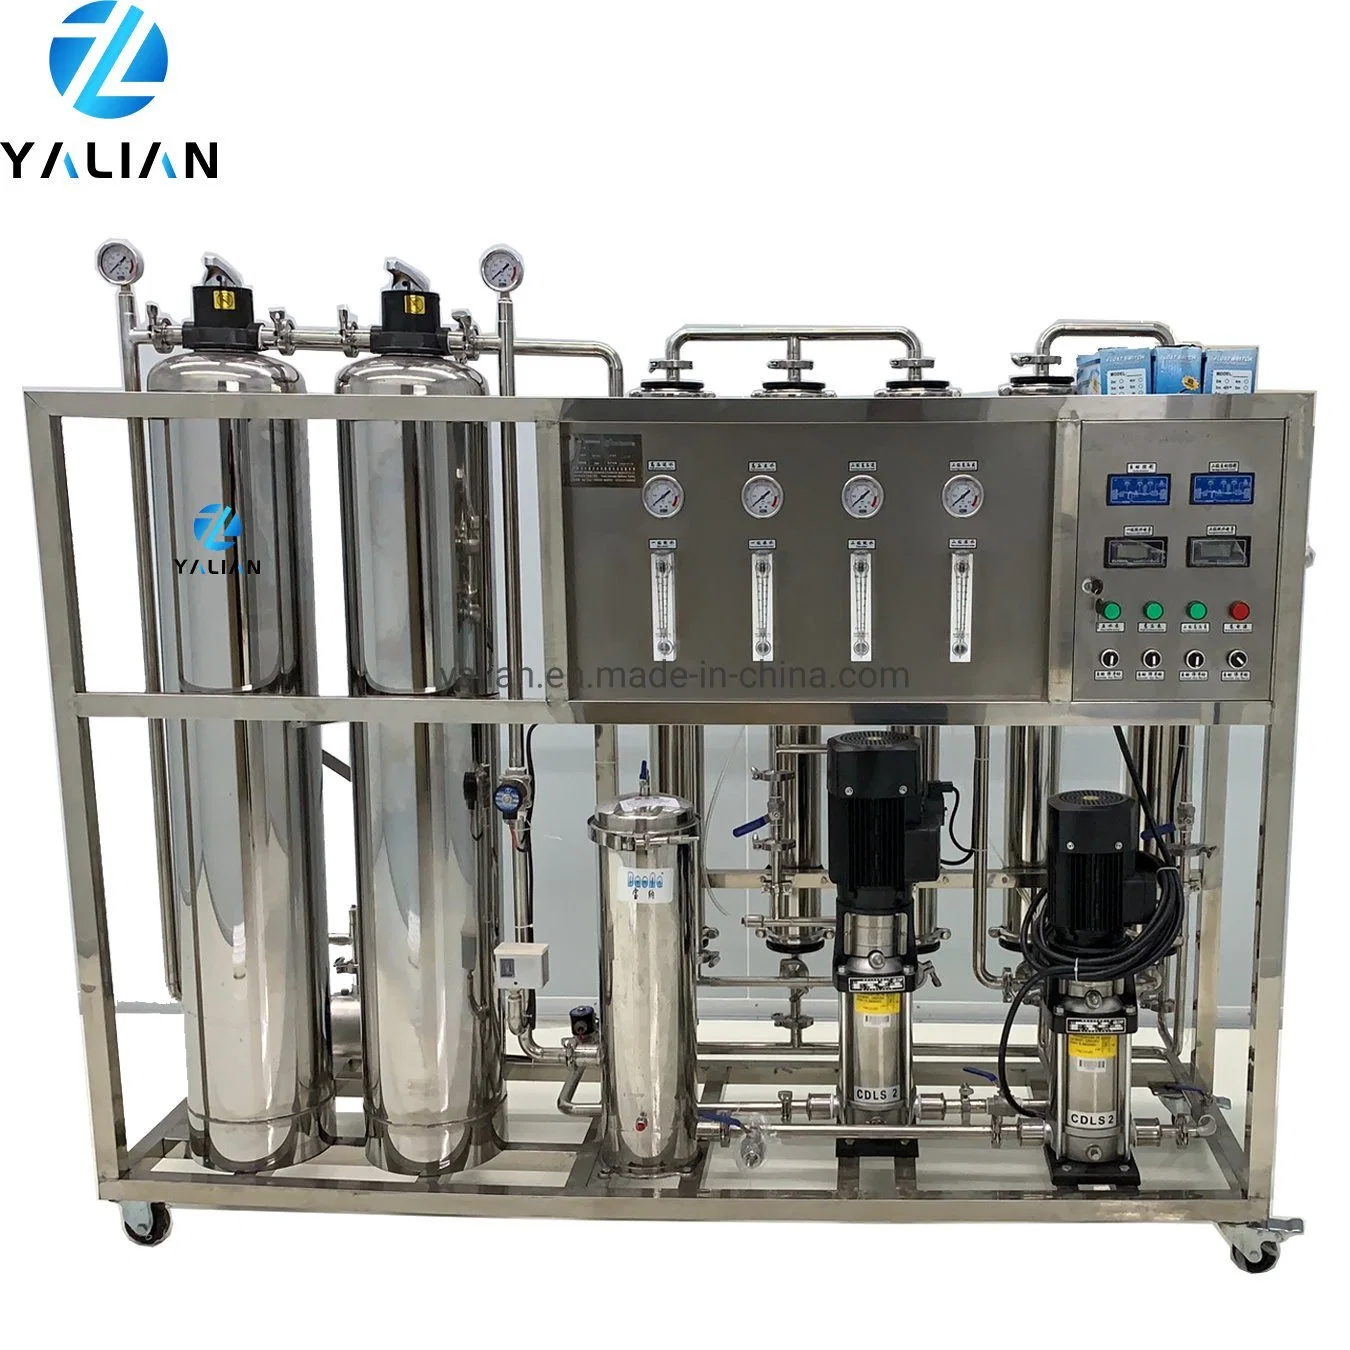 Reverse Osmosis Water Treatment, Pure Water Filter, Water Treatment Equipment